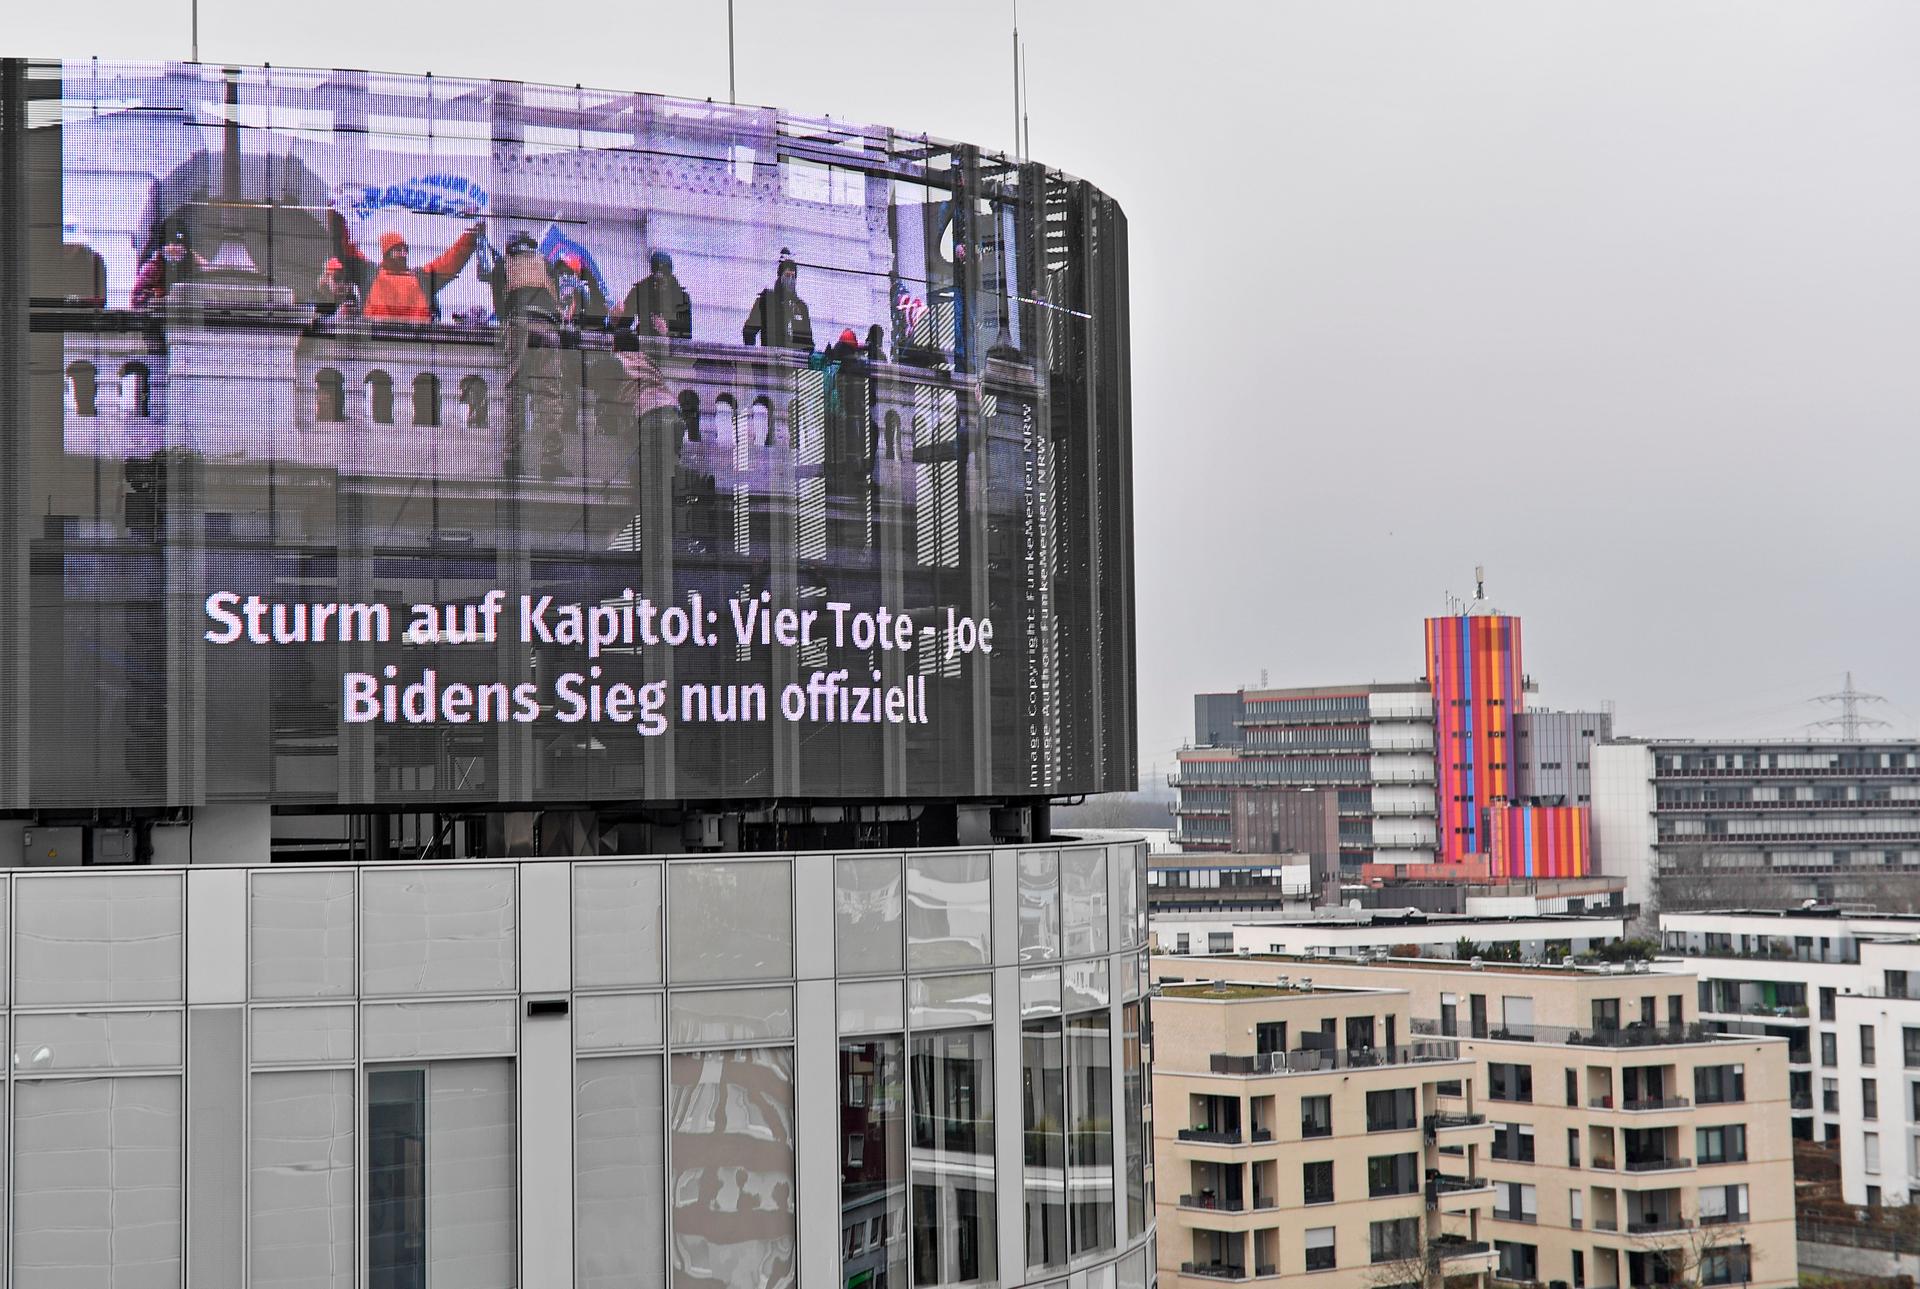 A big news screen on a building in Essen, Germany, showing protesters on the US Capitol in Washington, a headline reads 